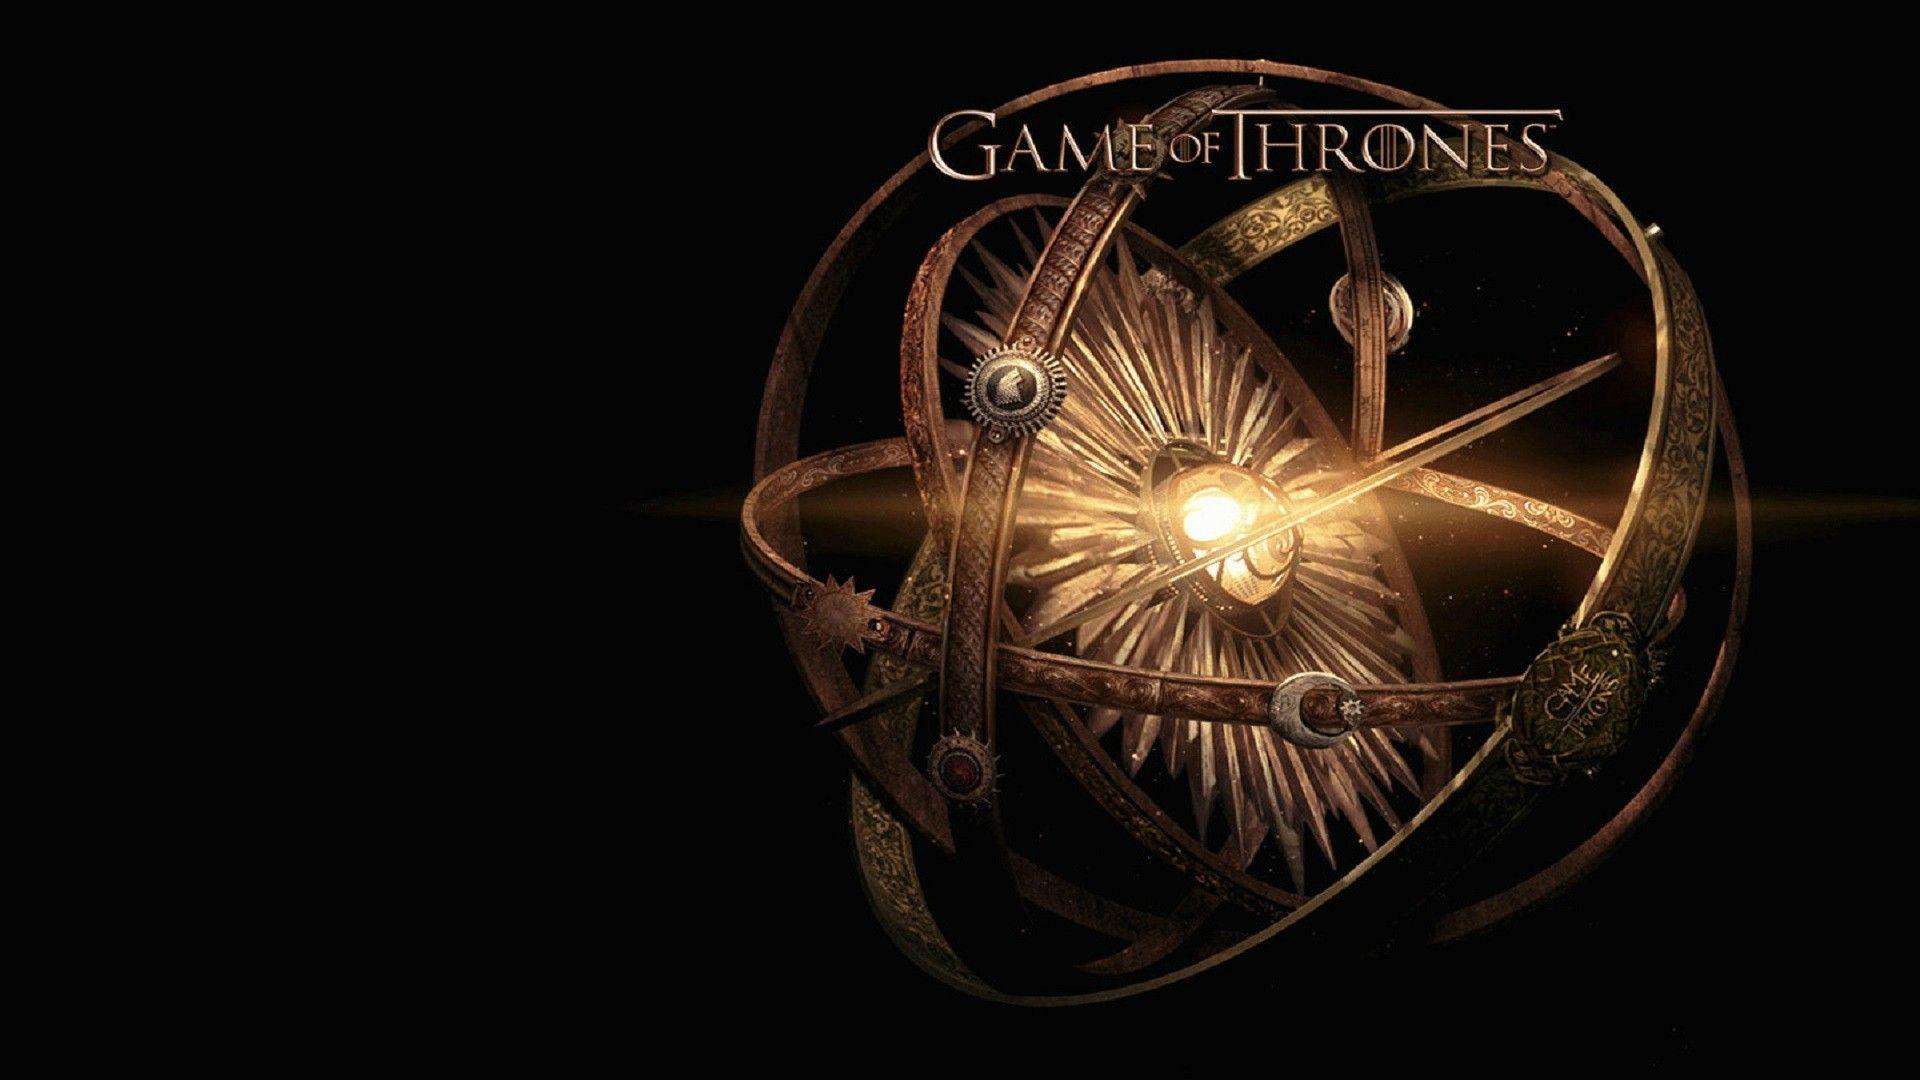 Game of Thrones wallpaperDownload free awesome full HD